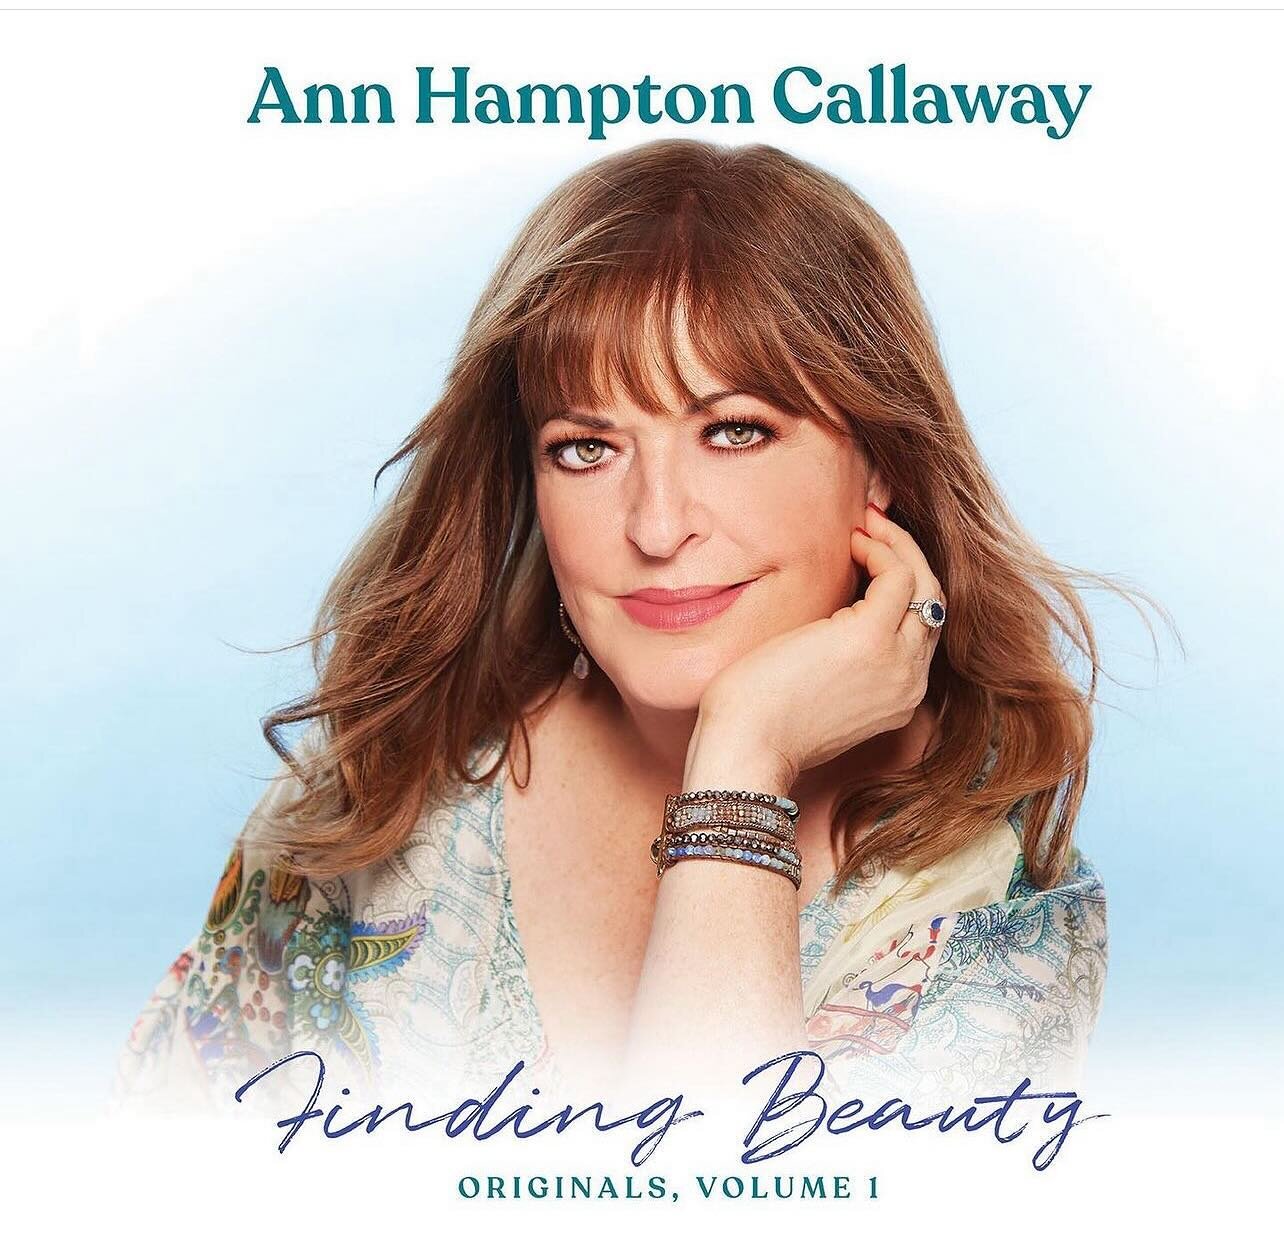 MAC Nominations are out today and @ahcallaway has some MASSIVE nominations ! Congrats Ann! Link in bio to all of Ann&rsquo;s music and platforms!
 
Major Celebrity
Ann Hampton Callaway Sings the &lsquo;70s
54 Below

Major Duo Group
Ann Hampton Callaw